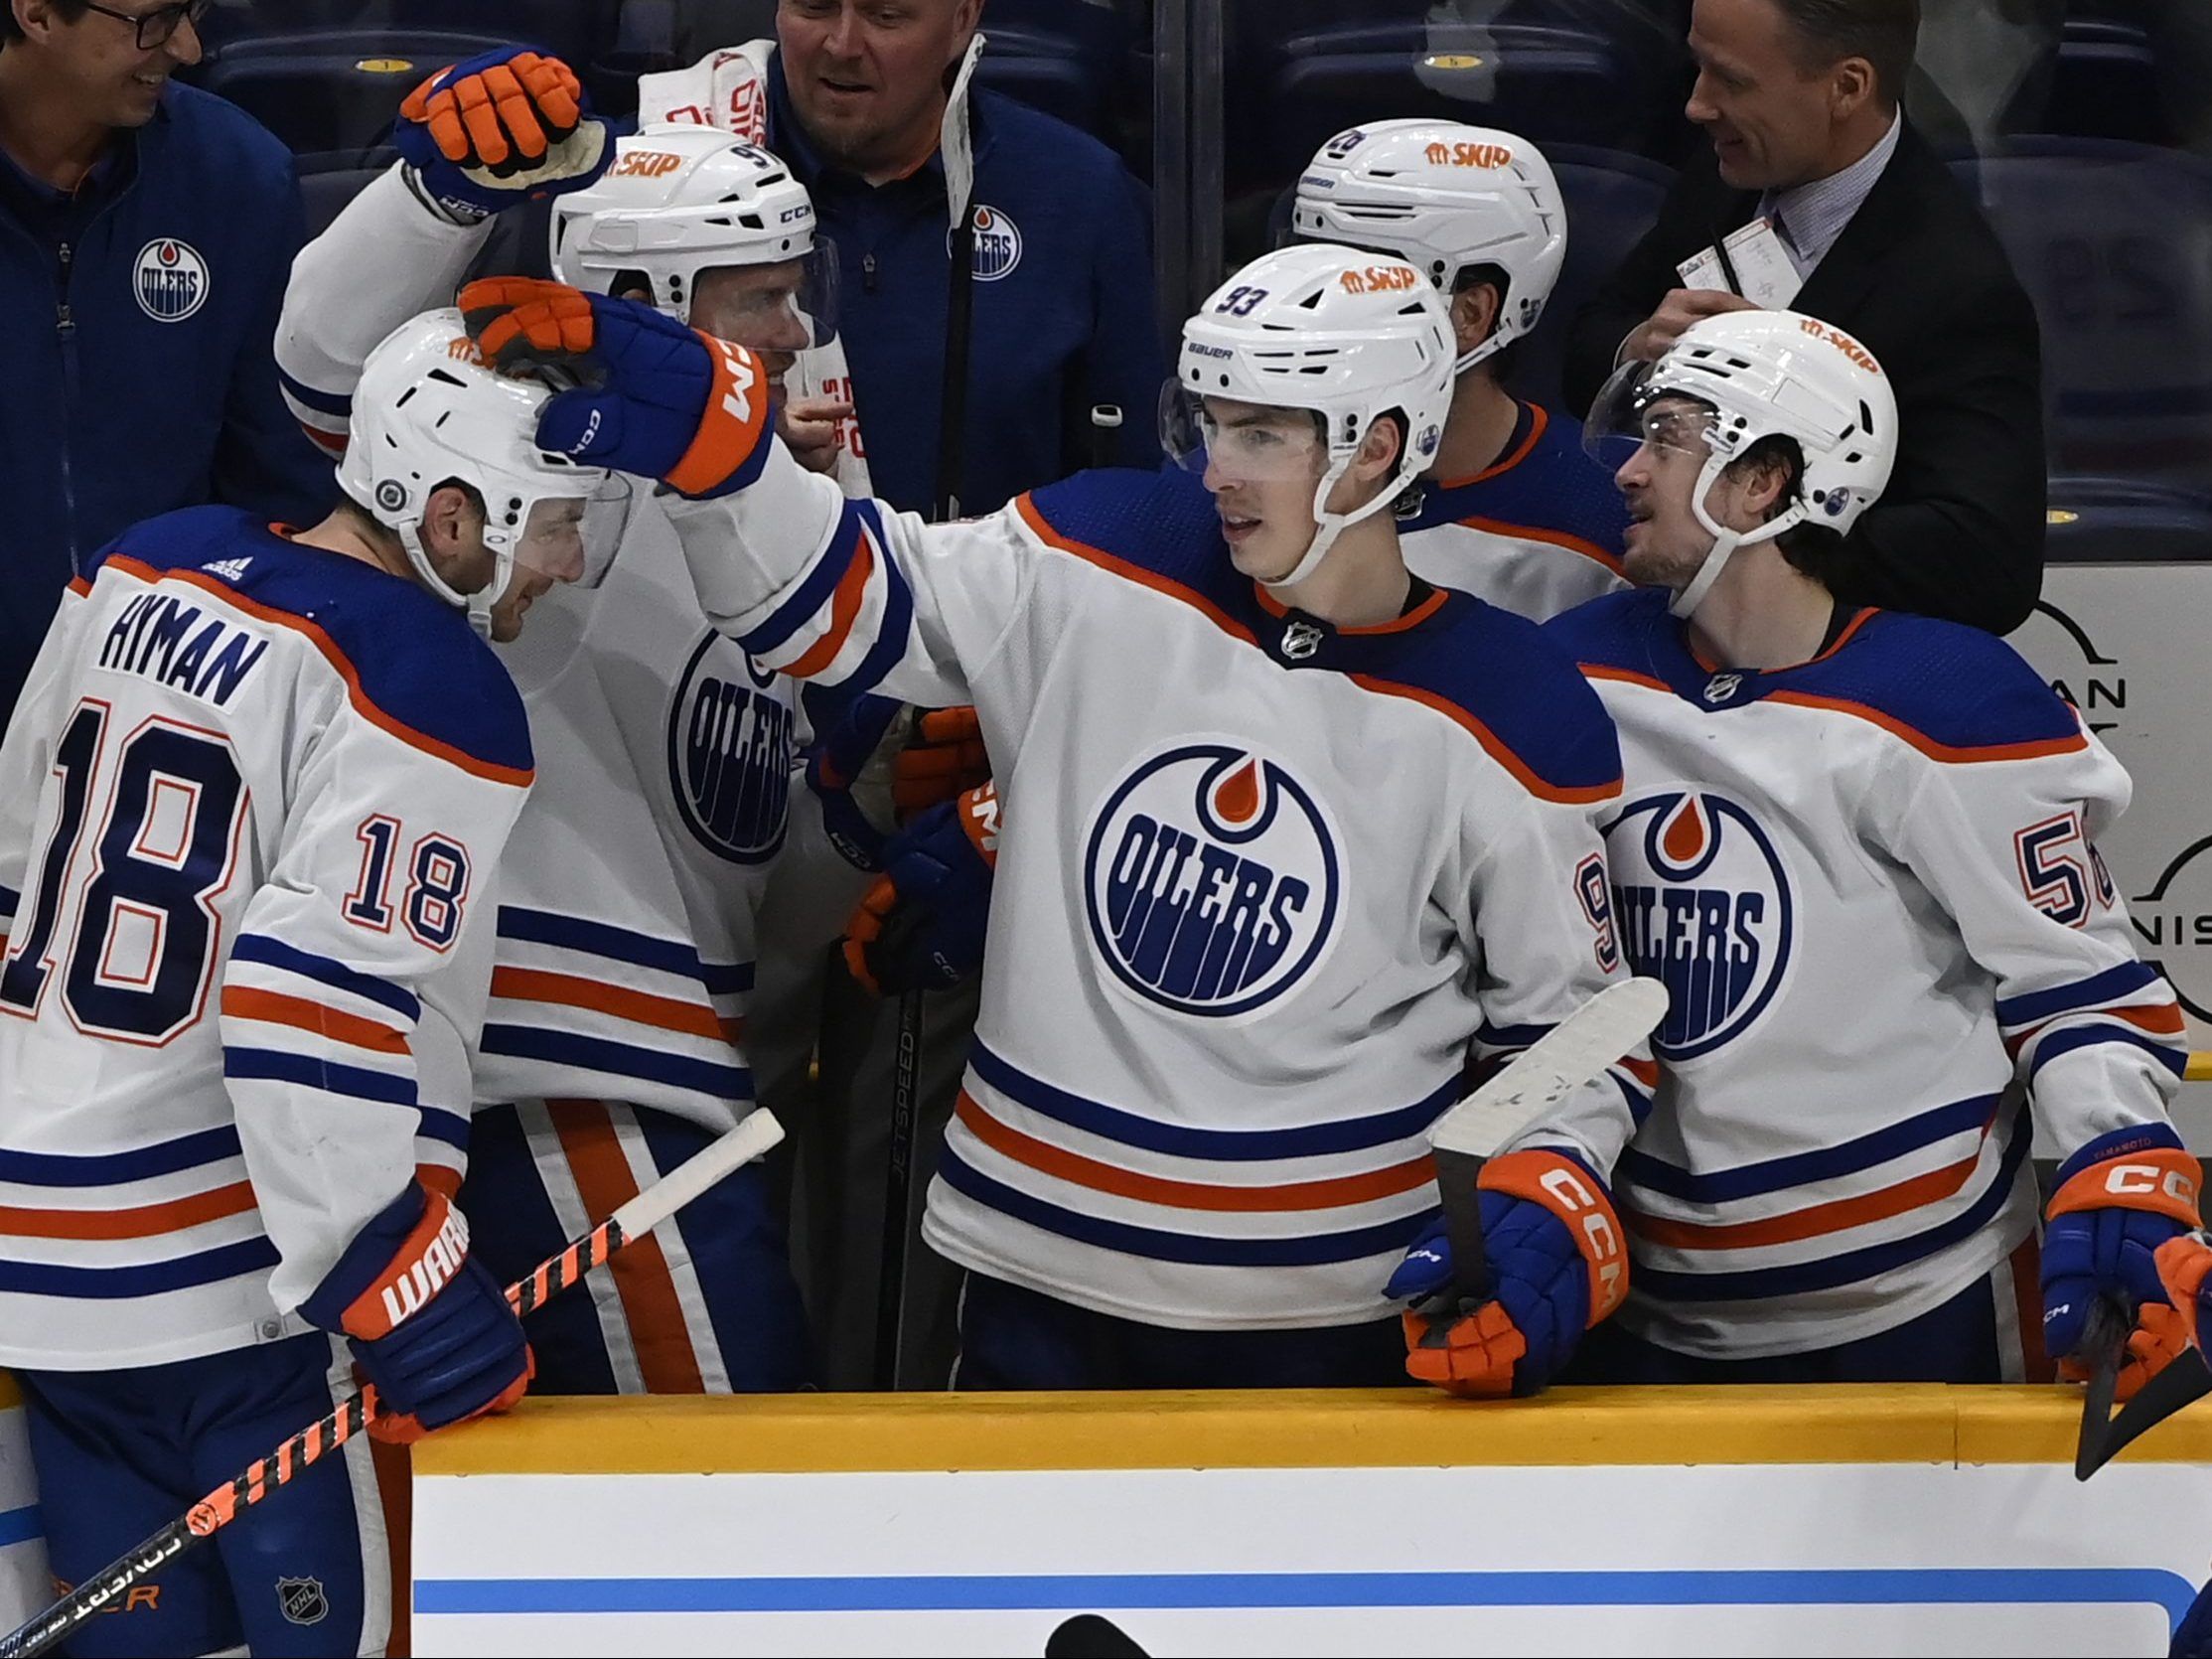 Edmonton Oilers' Zach Hyman is riding high after his first NHL hat trick